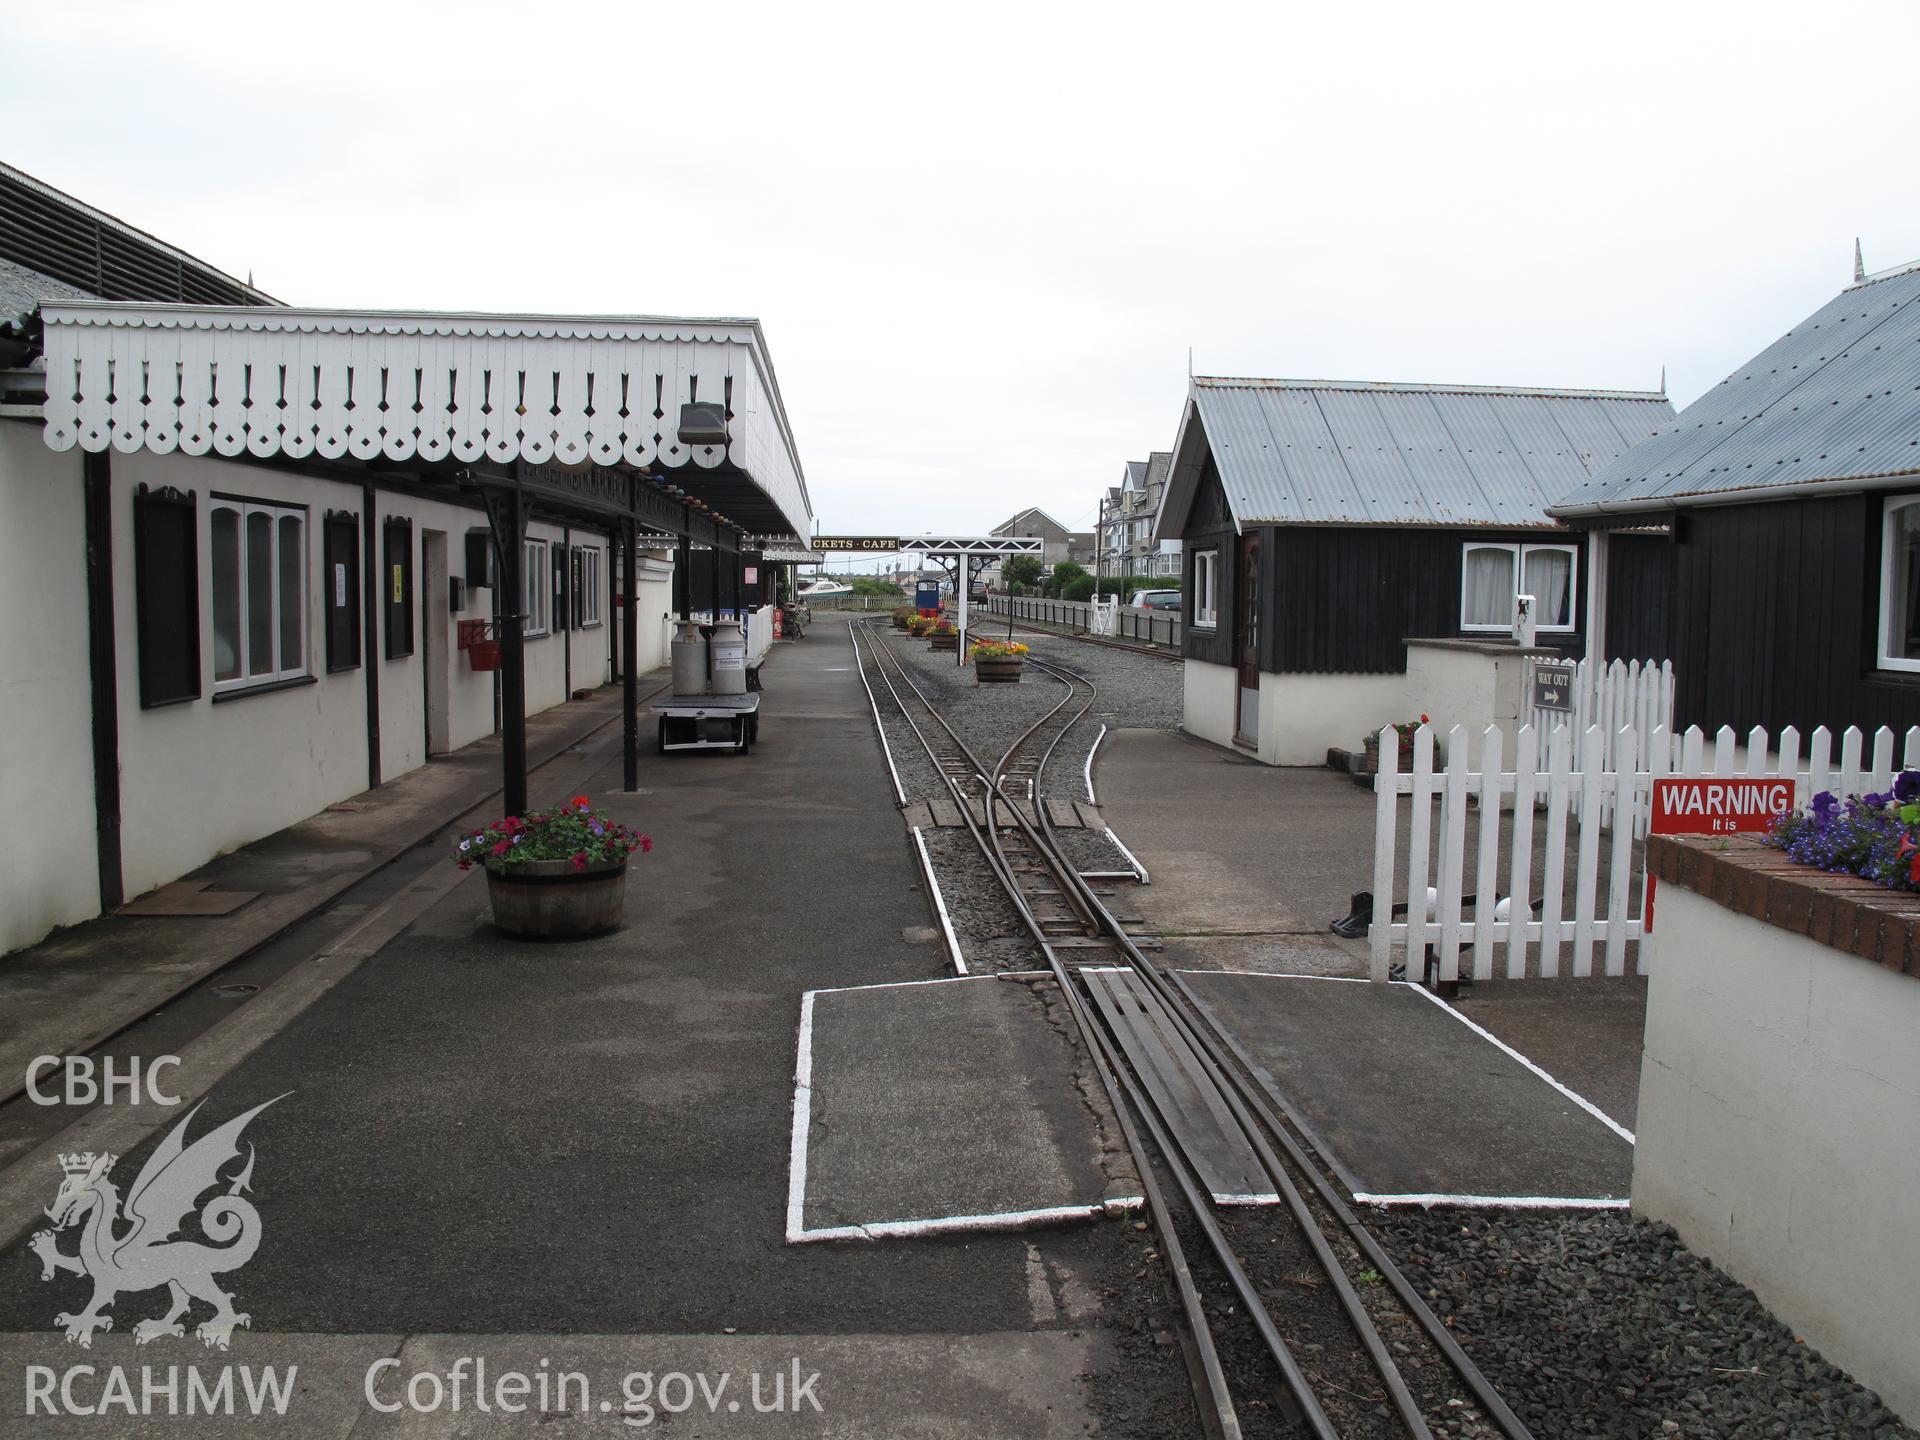 View from the southeast of Fairbourne Station, Fairbourne Railway.